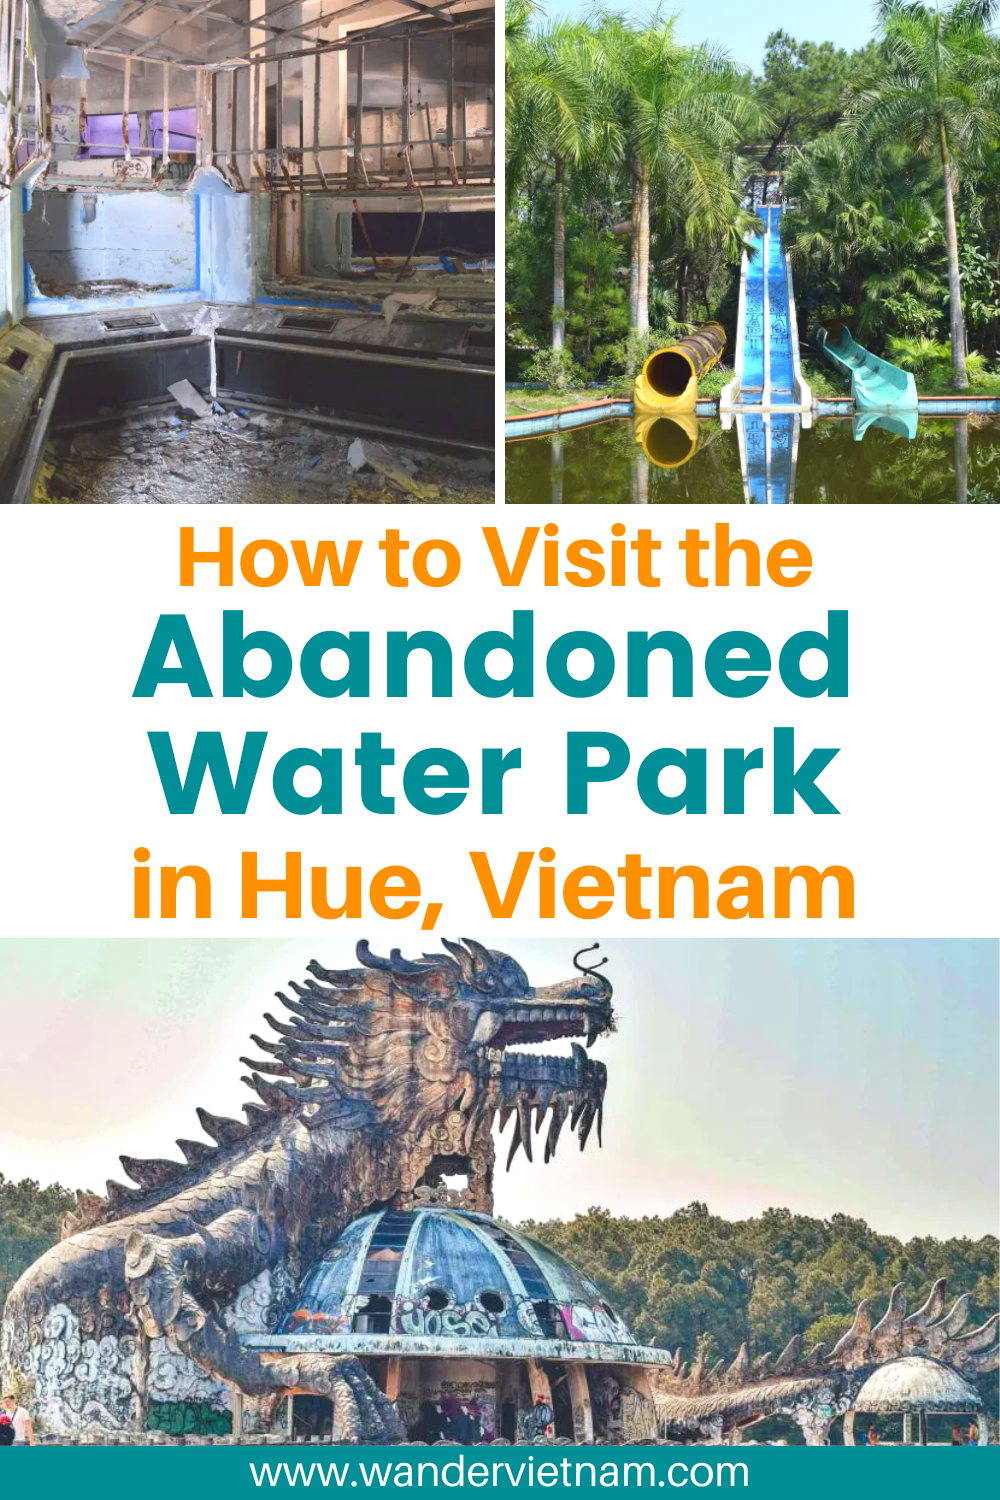 How to Visit the Abandoned Water Park in Hue | Full Guide